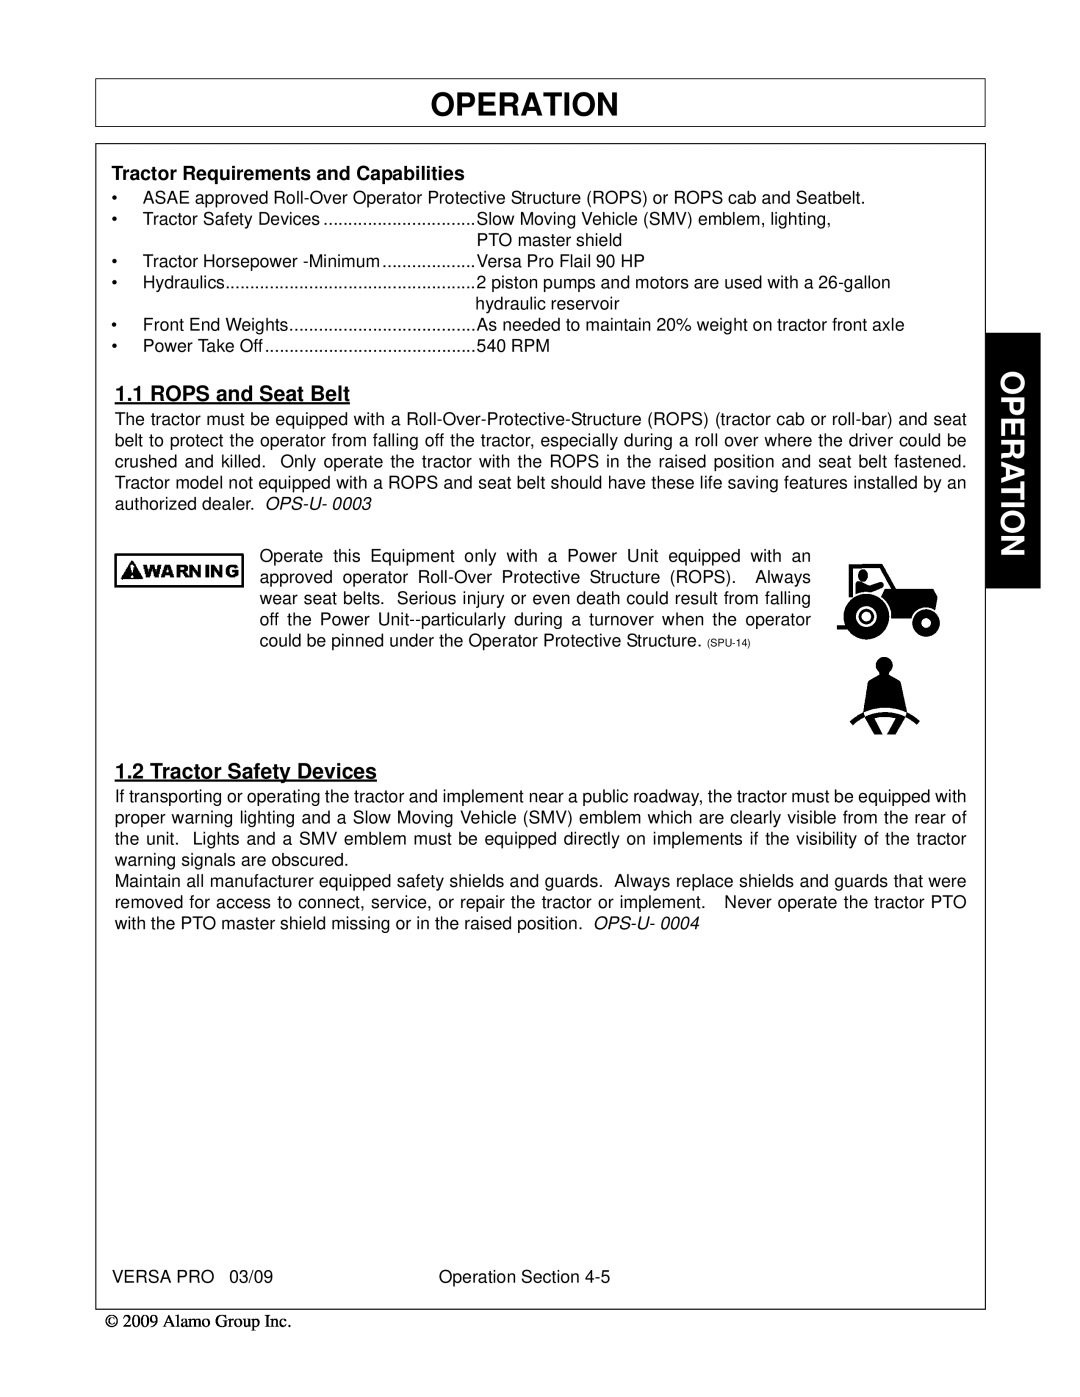 Alamo 803350C manual ROPS and Seat Belt, Tractor Safety Devices, Operation, Tractor Requirements and Capabilities 